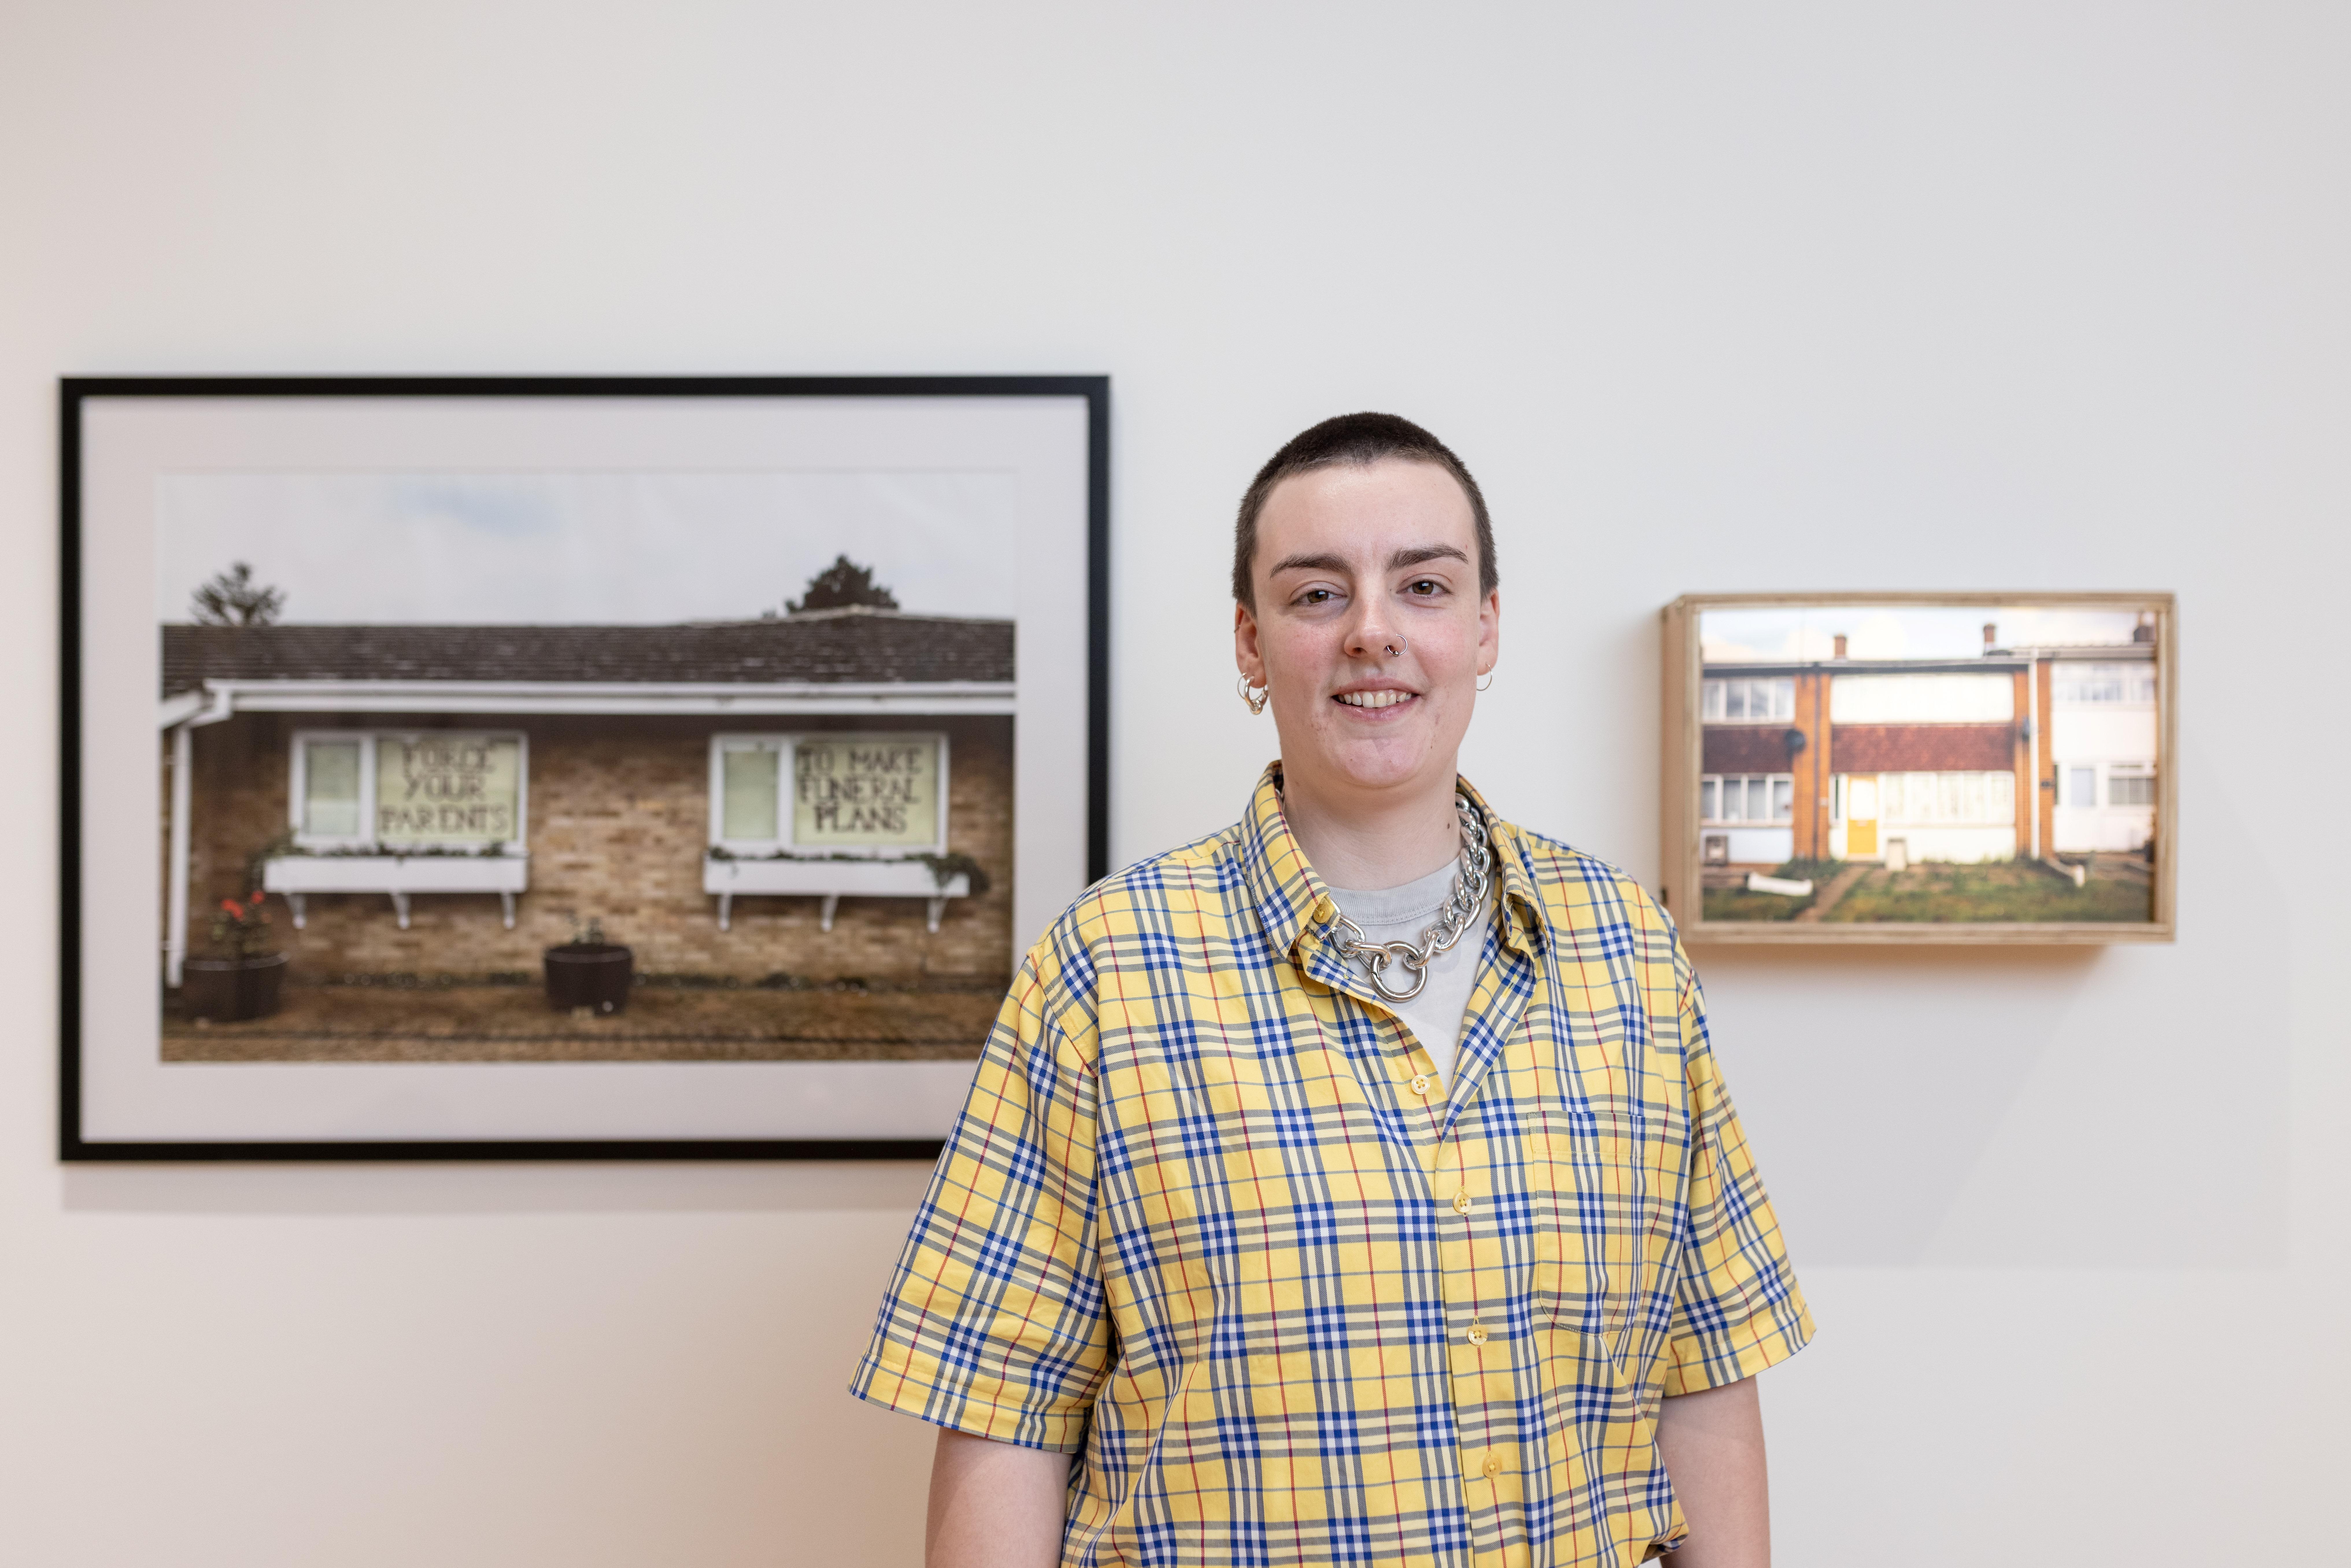 FAHACS student George Storm Fletcher photographed in front of their work featured at Leeds Art Gallery for Leeds Artists Show 2023. George is looking directly into the camera and smiling. To the left and right of George are two pieces of their work.